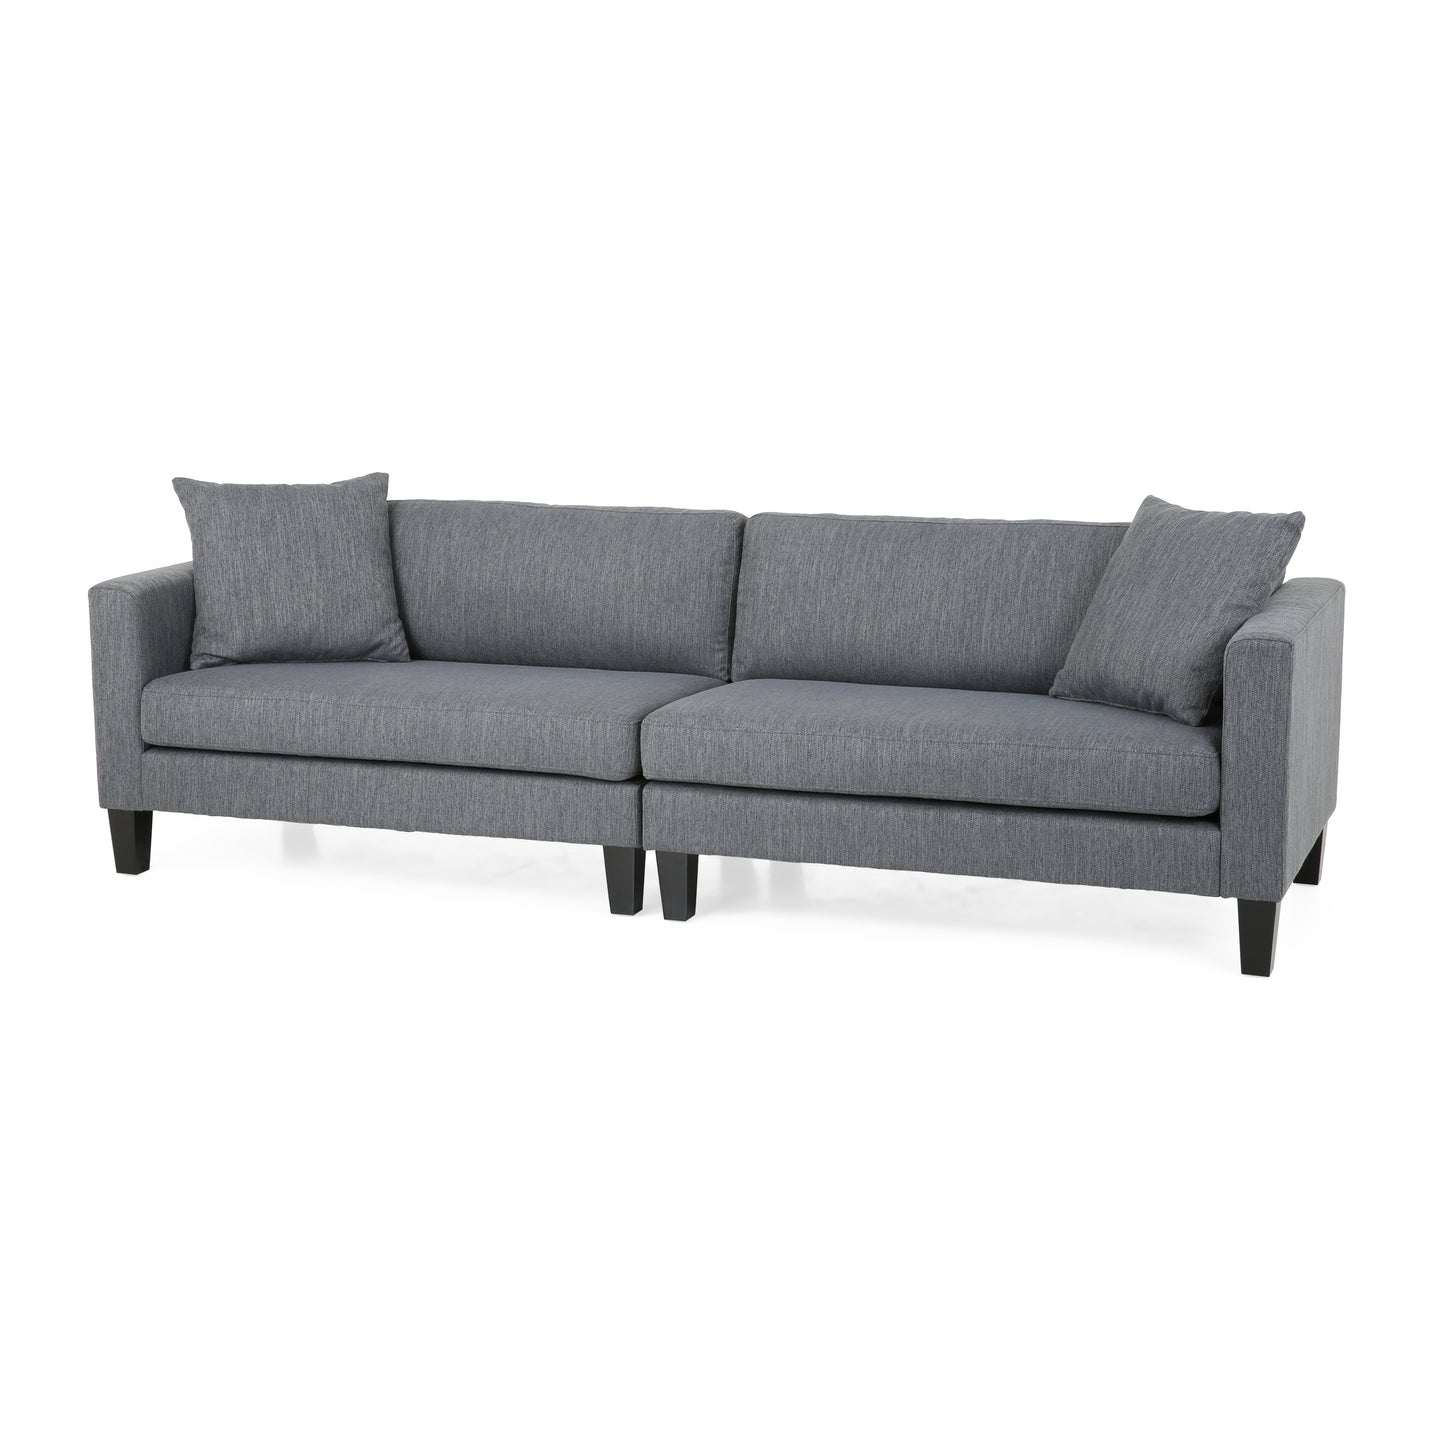 Ilaan Contemporary 4 Seater Fabric Sofa with Accent Pillows